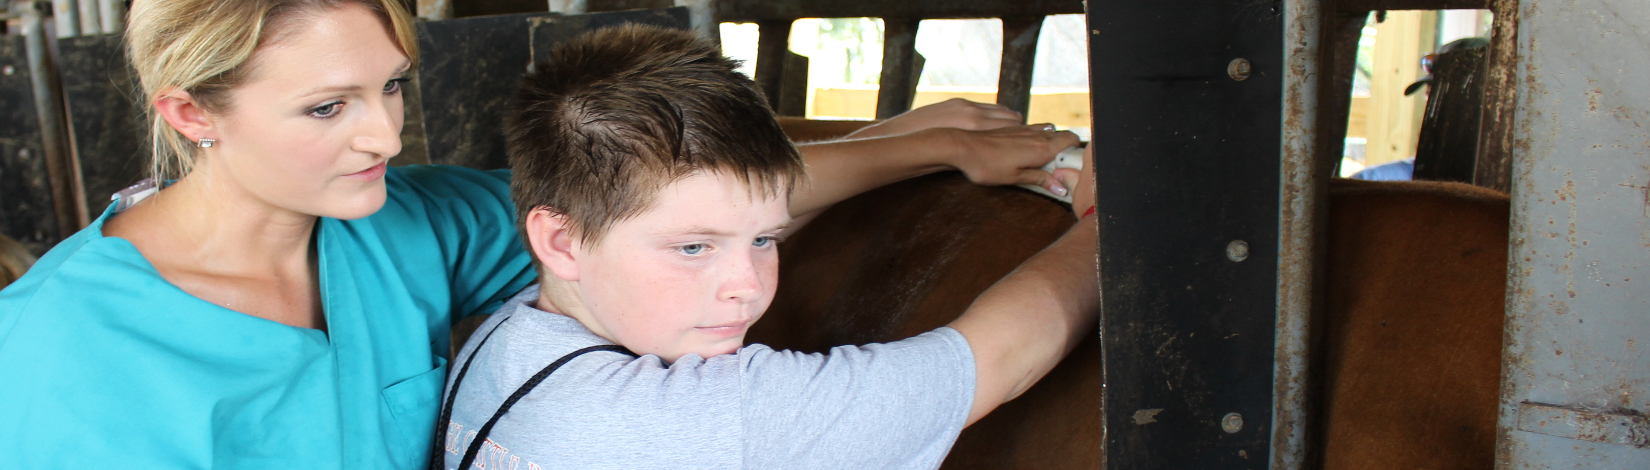 4-H youth examining a cow with an ultra sound 